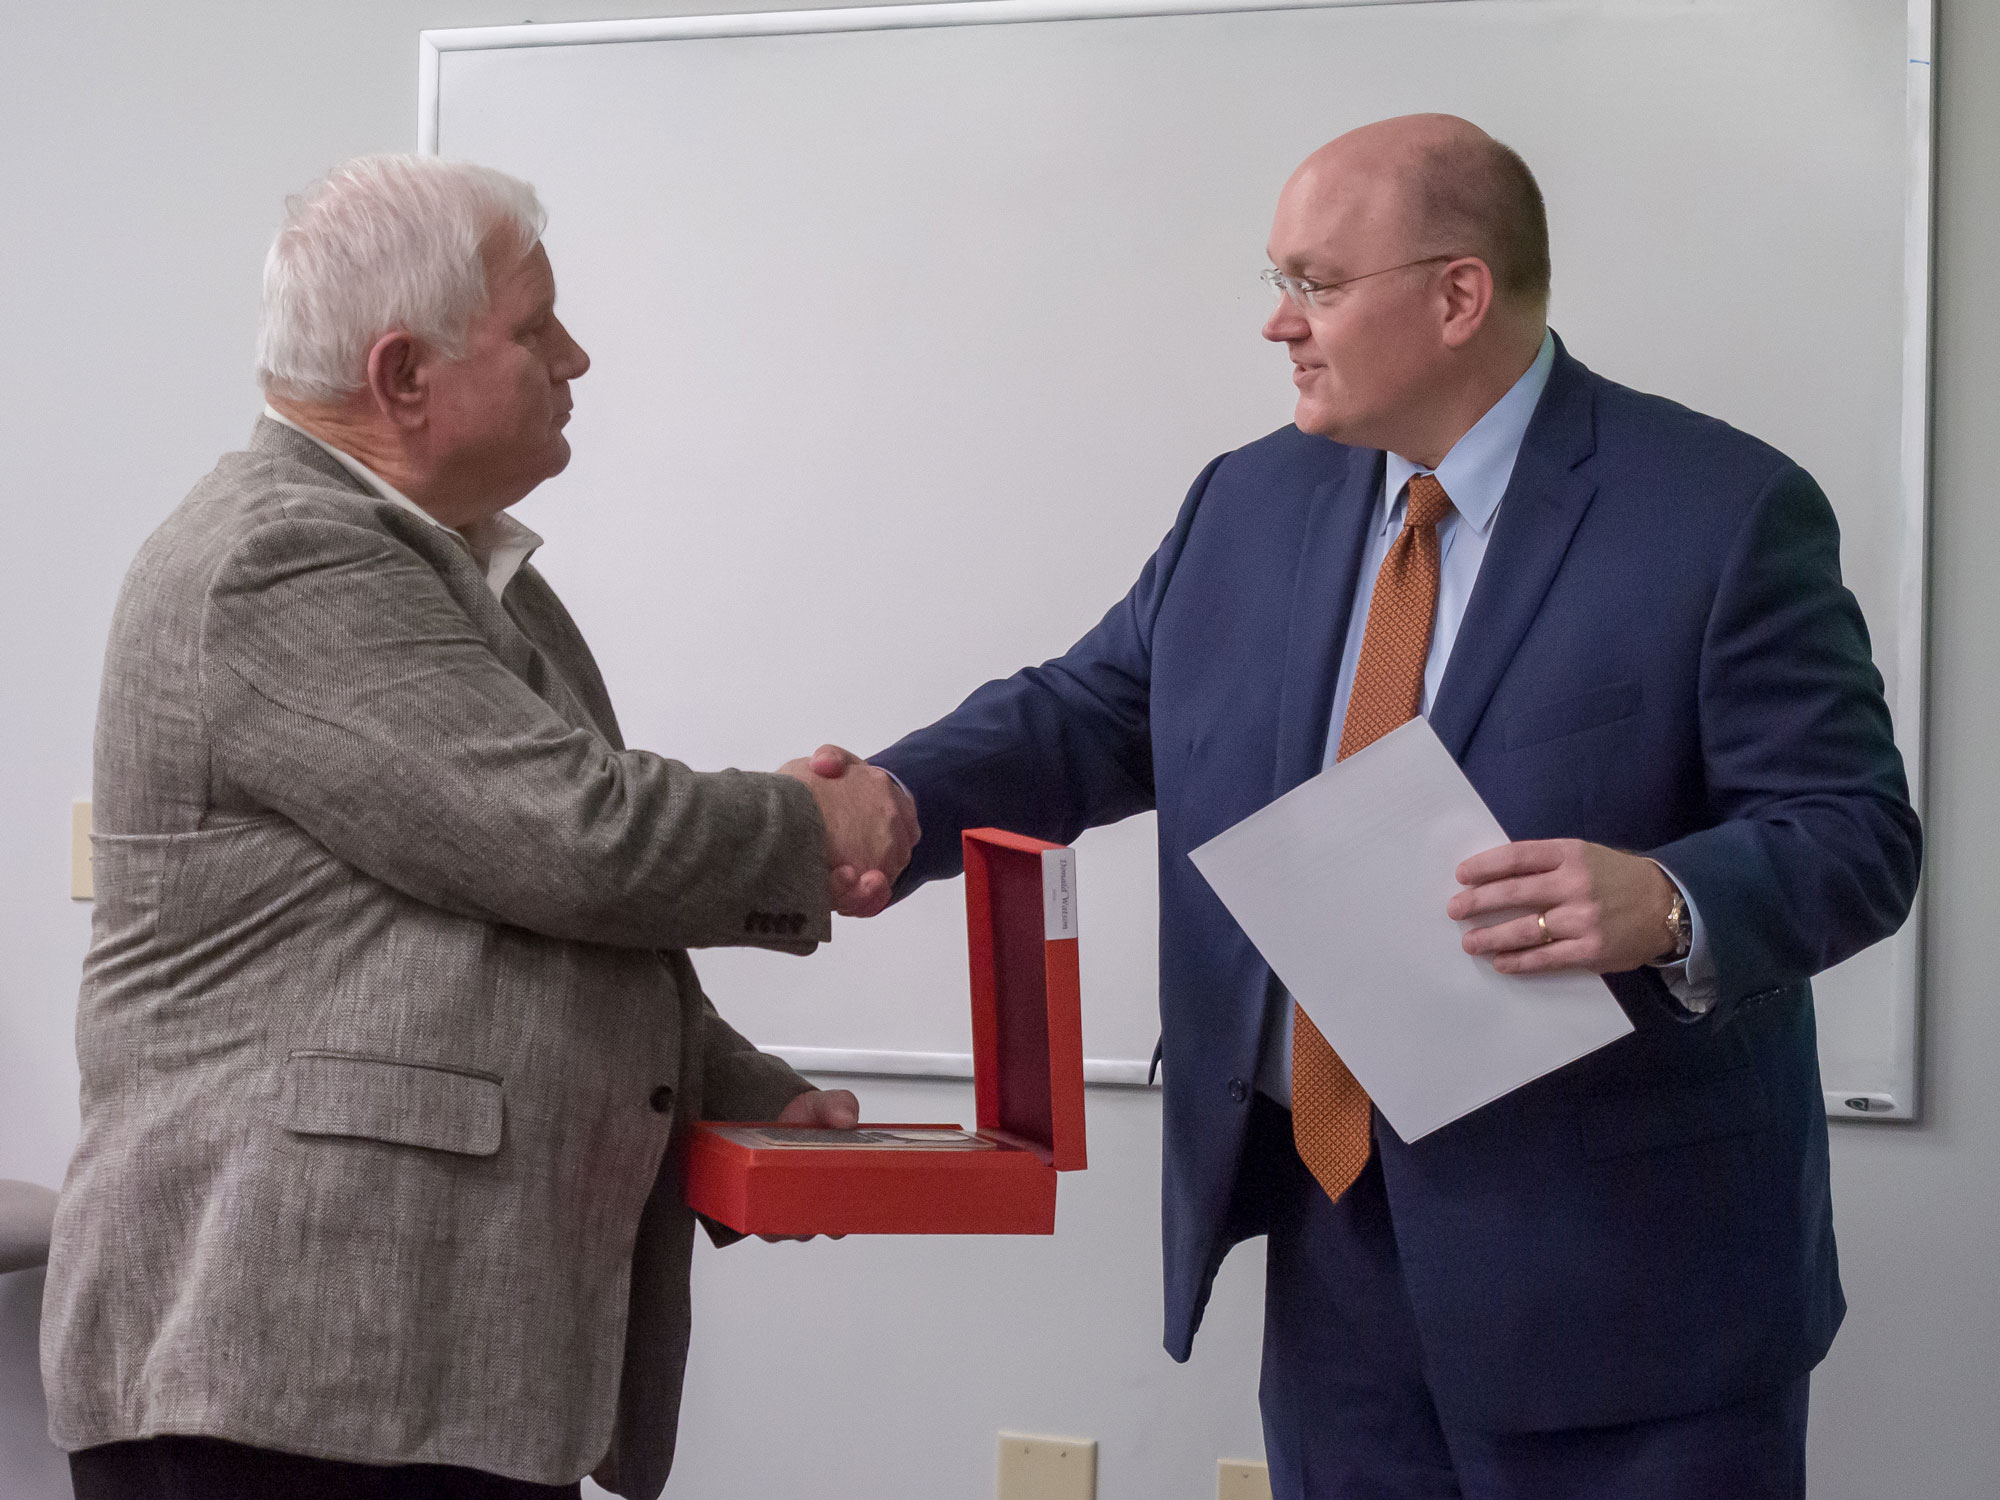 Don Watson receives the Wall of Honor plaque from Chris Roberts, NCAT board vice-chair and dean of the Samuel Ginn College of Engineering at Auburn University.